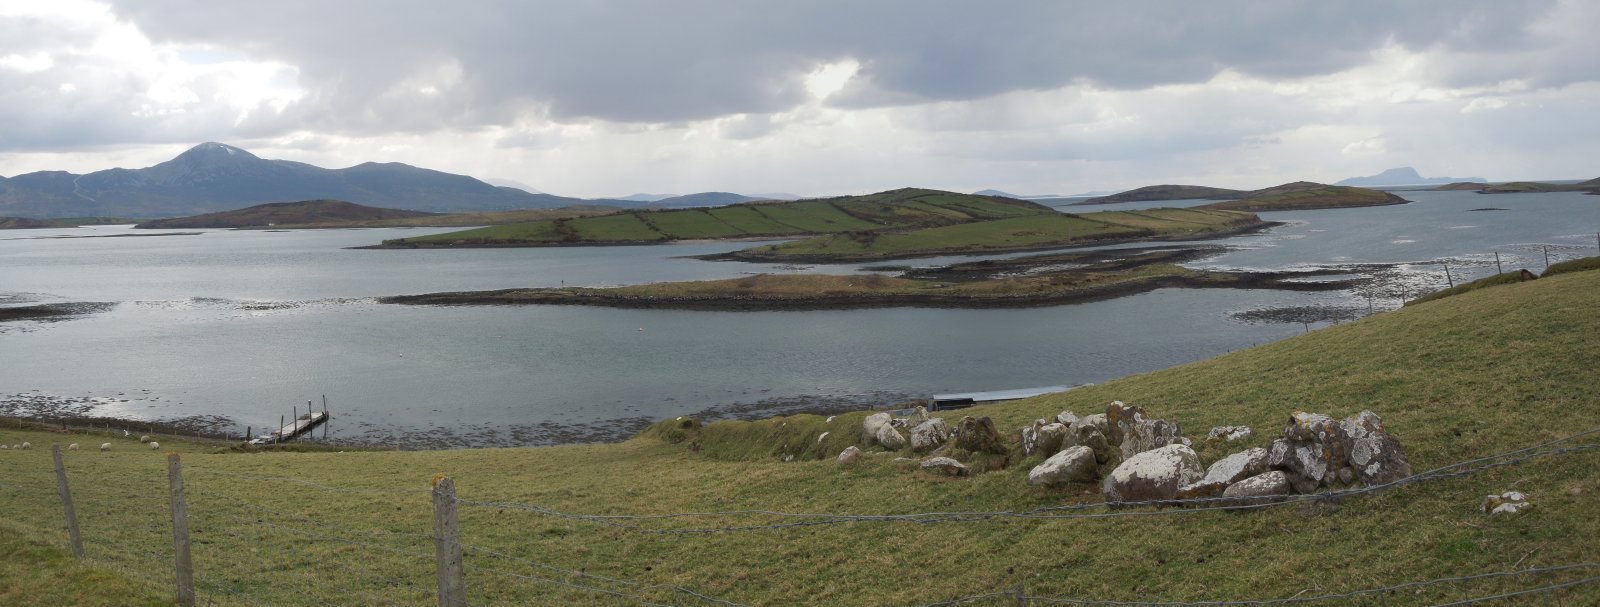 The view of Croagh Patrick (left) and of various Clew Bay islands from Inishnakillew. Faintly visible in the distance towards the right is the hump of Clare Island